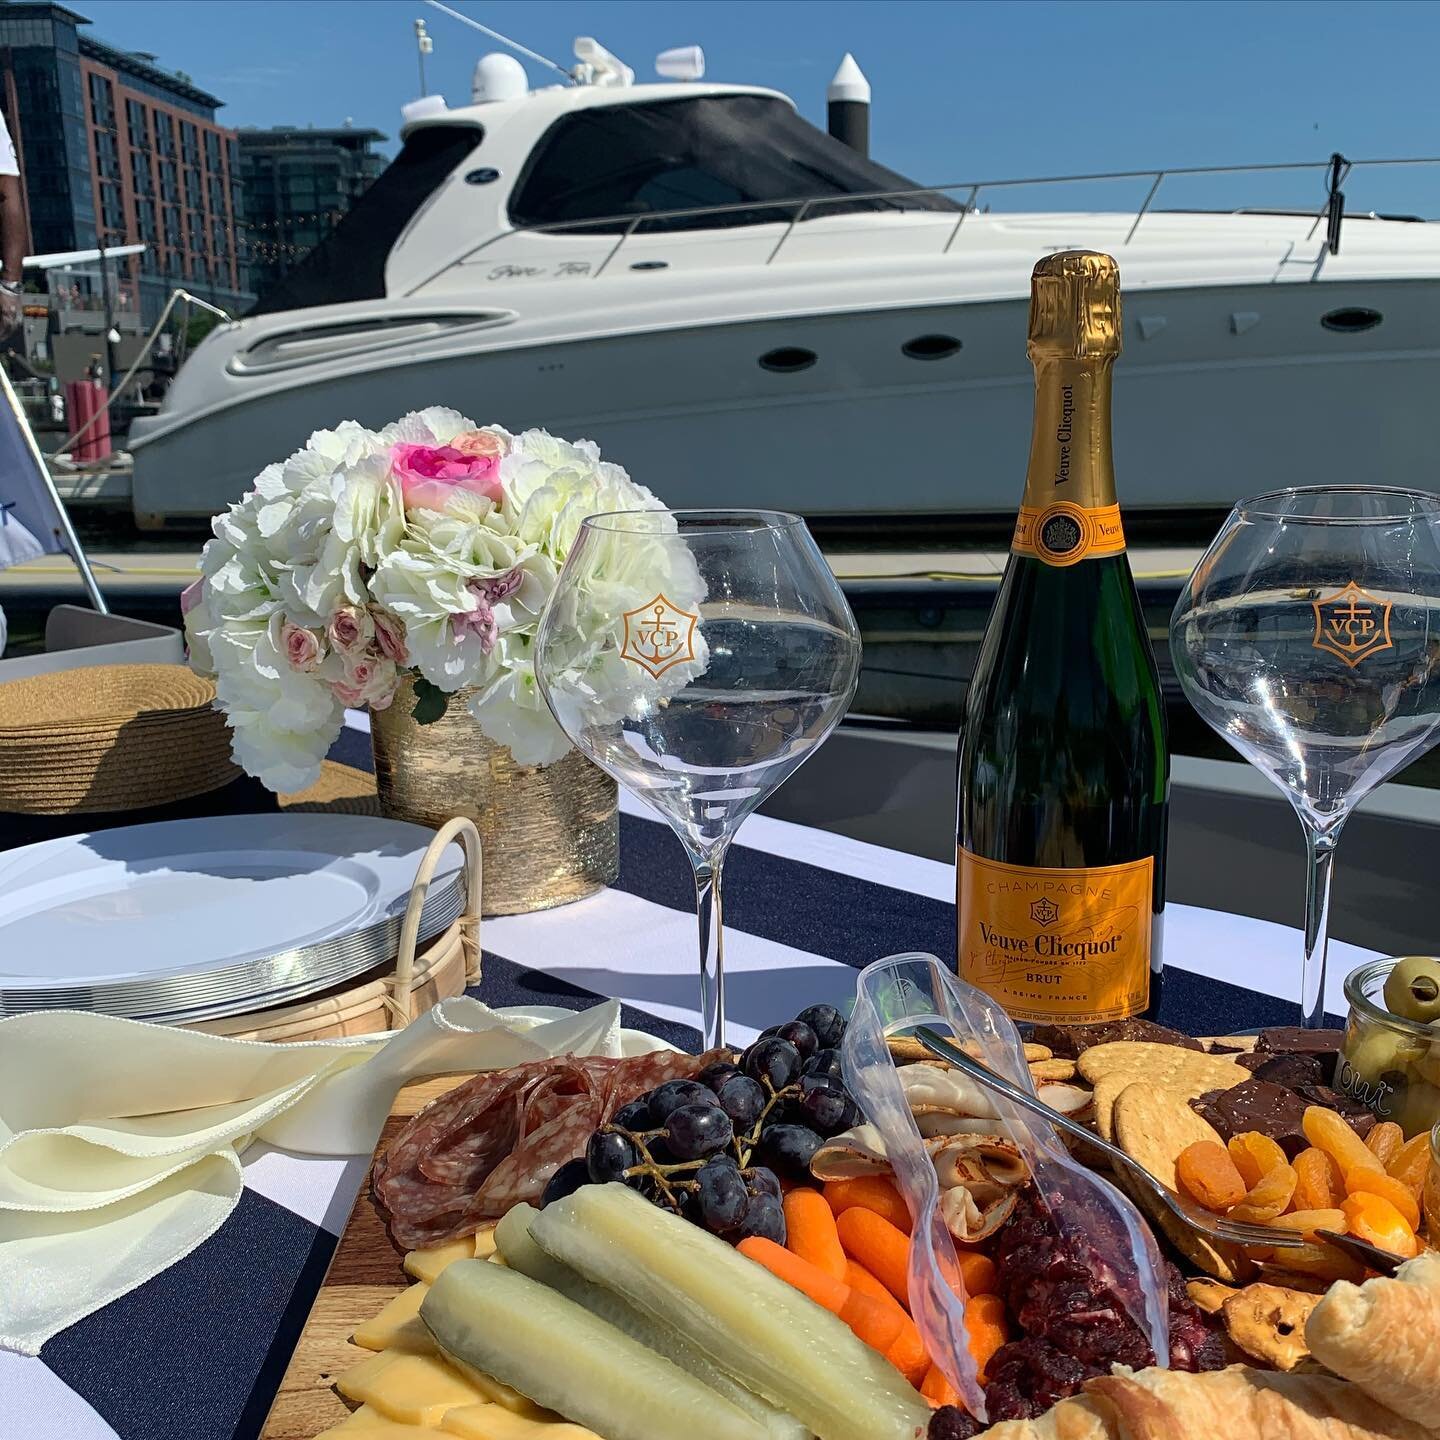 We set sail for a fun afternoon on the water and can&rsquo;t say enough about our excursion!  Let us help you navigate the Potomac with class and some help from the new picnic boats by @floatdc